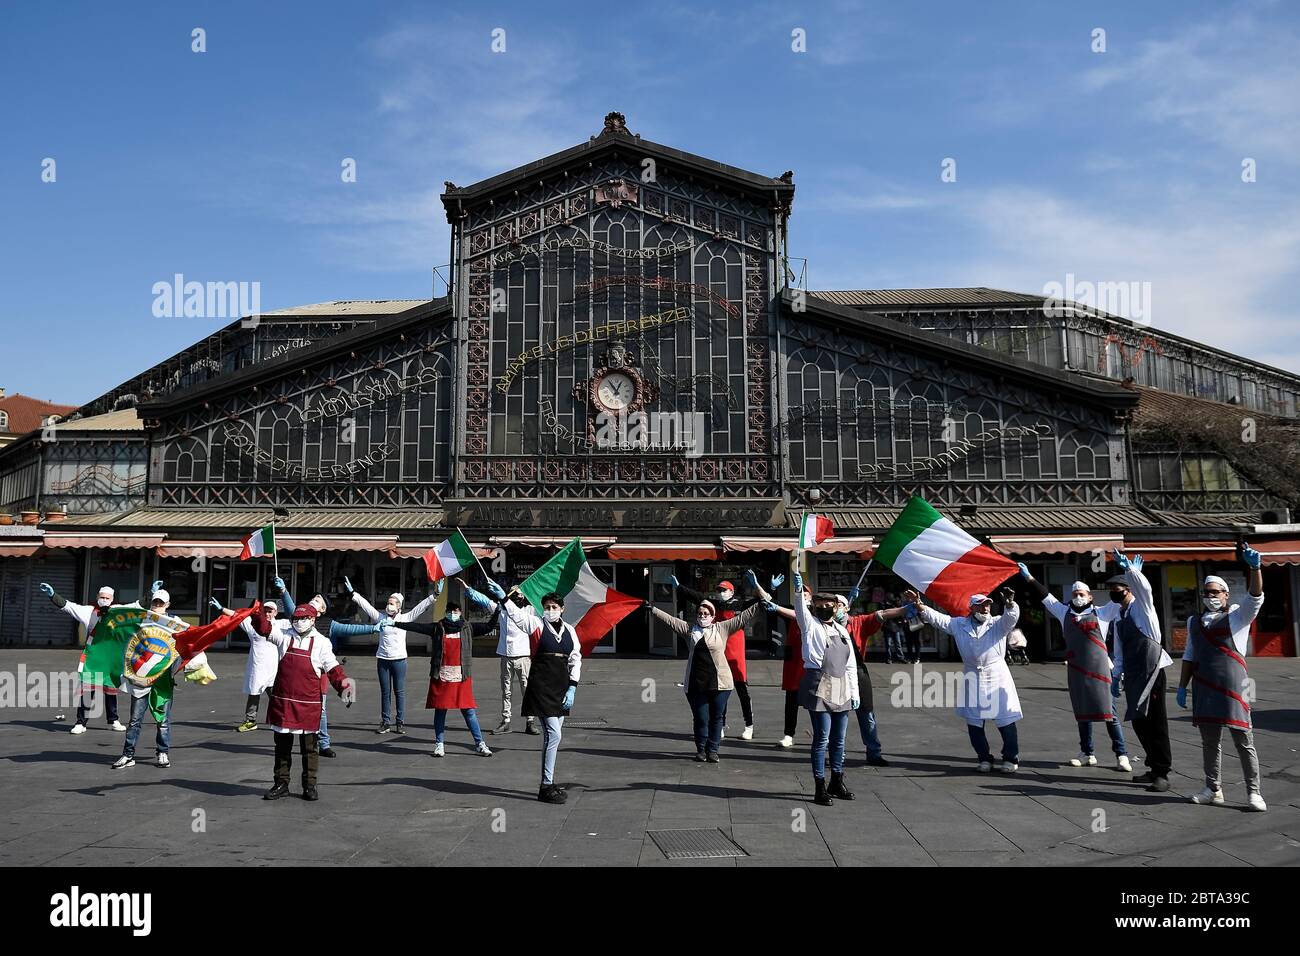 Turin, Italy - 17 March, 2020: Some merchants from the Porta Palazzo market improvise a flash mob by singing the Italian anthem and waving Italian flags to celebrate the 159th anniversary of the unification of Italy. Merchants stay at a safe distance to comply with measures to prevent the spread of coronavirus. The Italian government imposed unprecedented restrictions to halt the spread of COVID-19 coronavirus outbreak, among other measures people movements are allowed only for work, for buying essential goods and for health reasons. Credit: Nicolò Campo/Alamy Live News Stock Photo